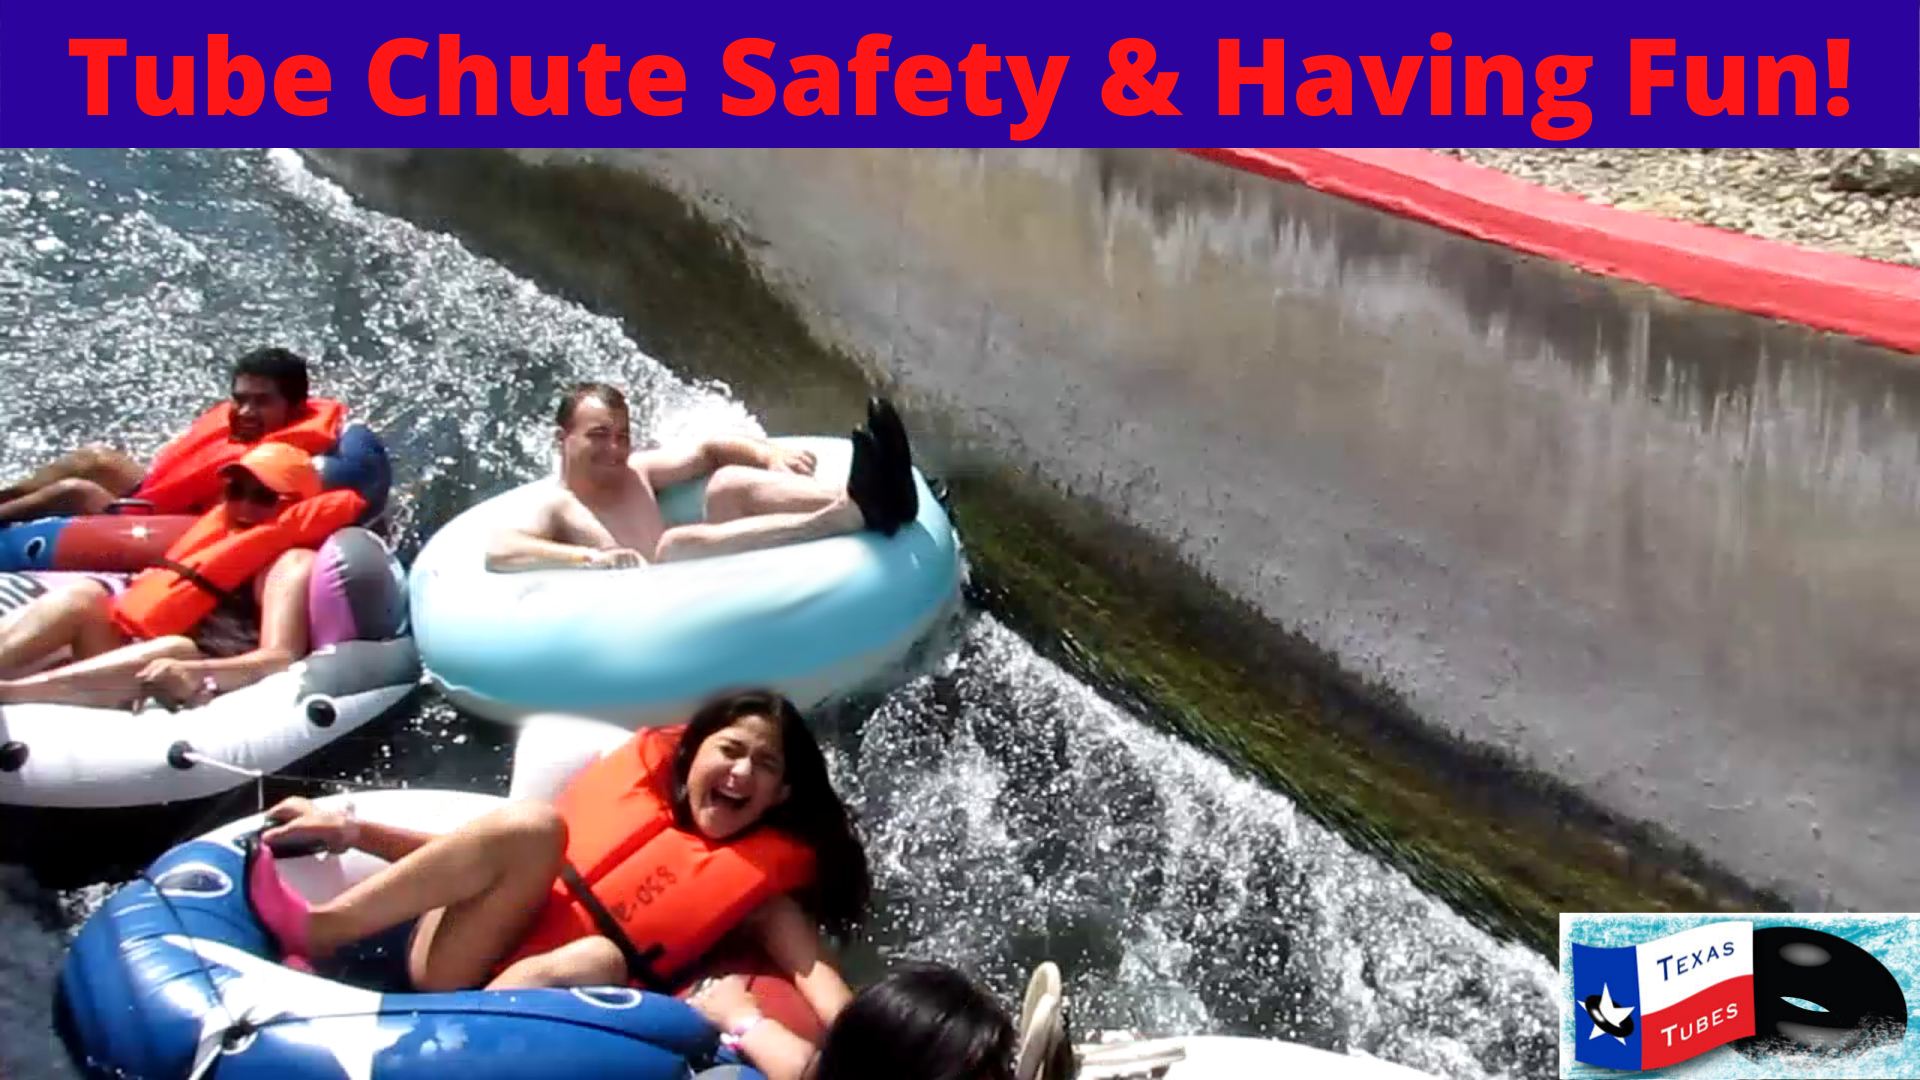 All weak swimmers and all Kids 8 years and younger should wear a Life Jacket for their entire float trip, especially if they choose to go through the Tube Chute. Texas Tubes